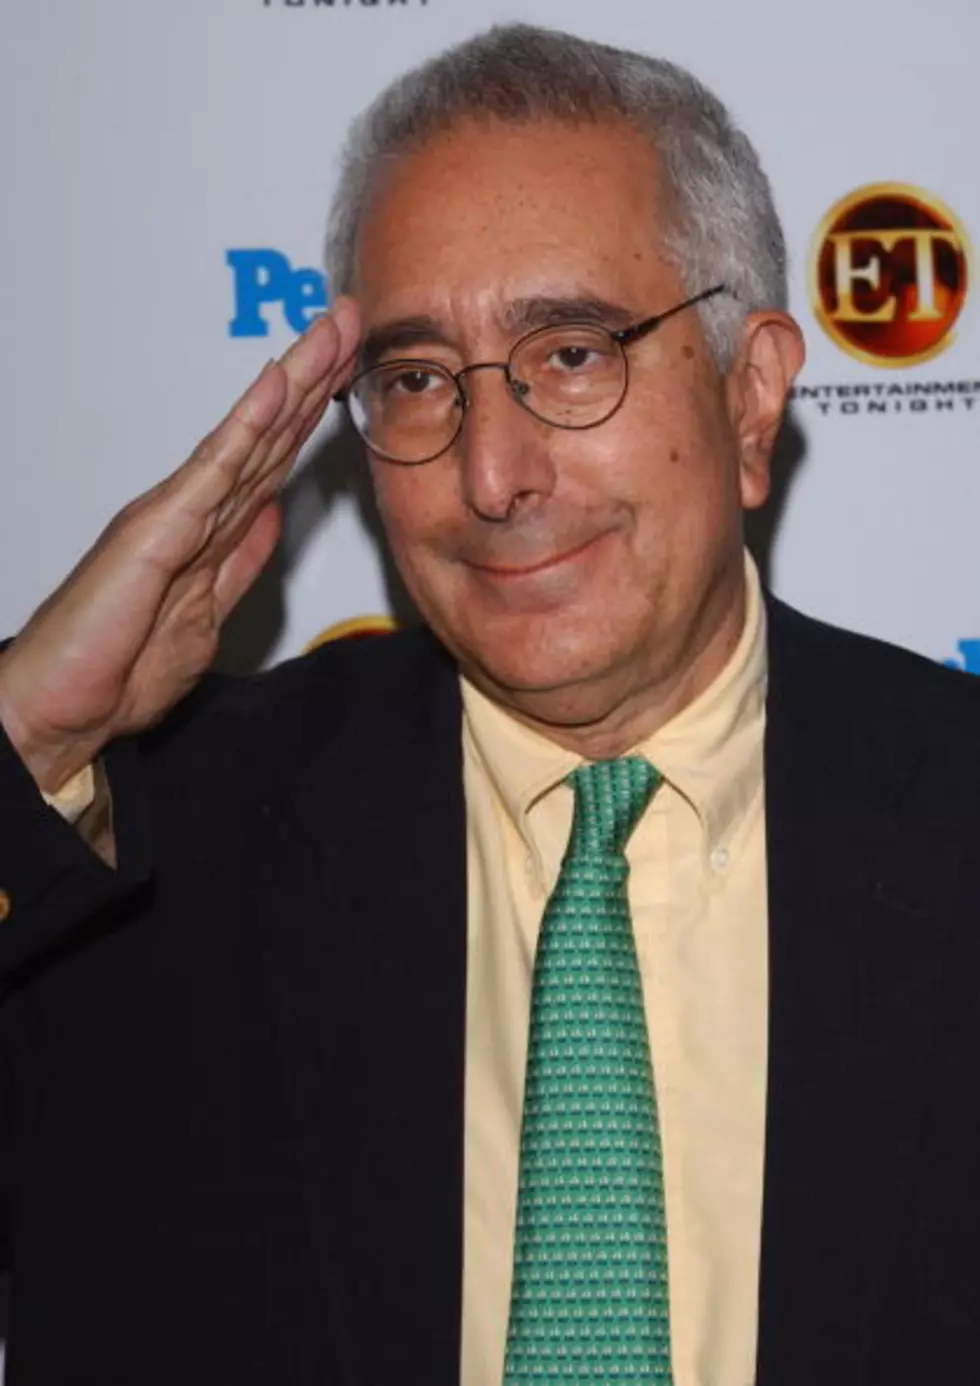 TV Show Host Ben Stein In Weird Text Feud With Grand Rapids Woman